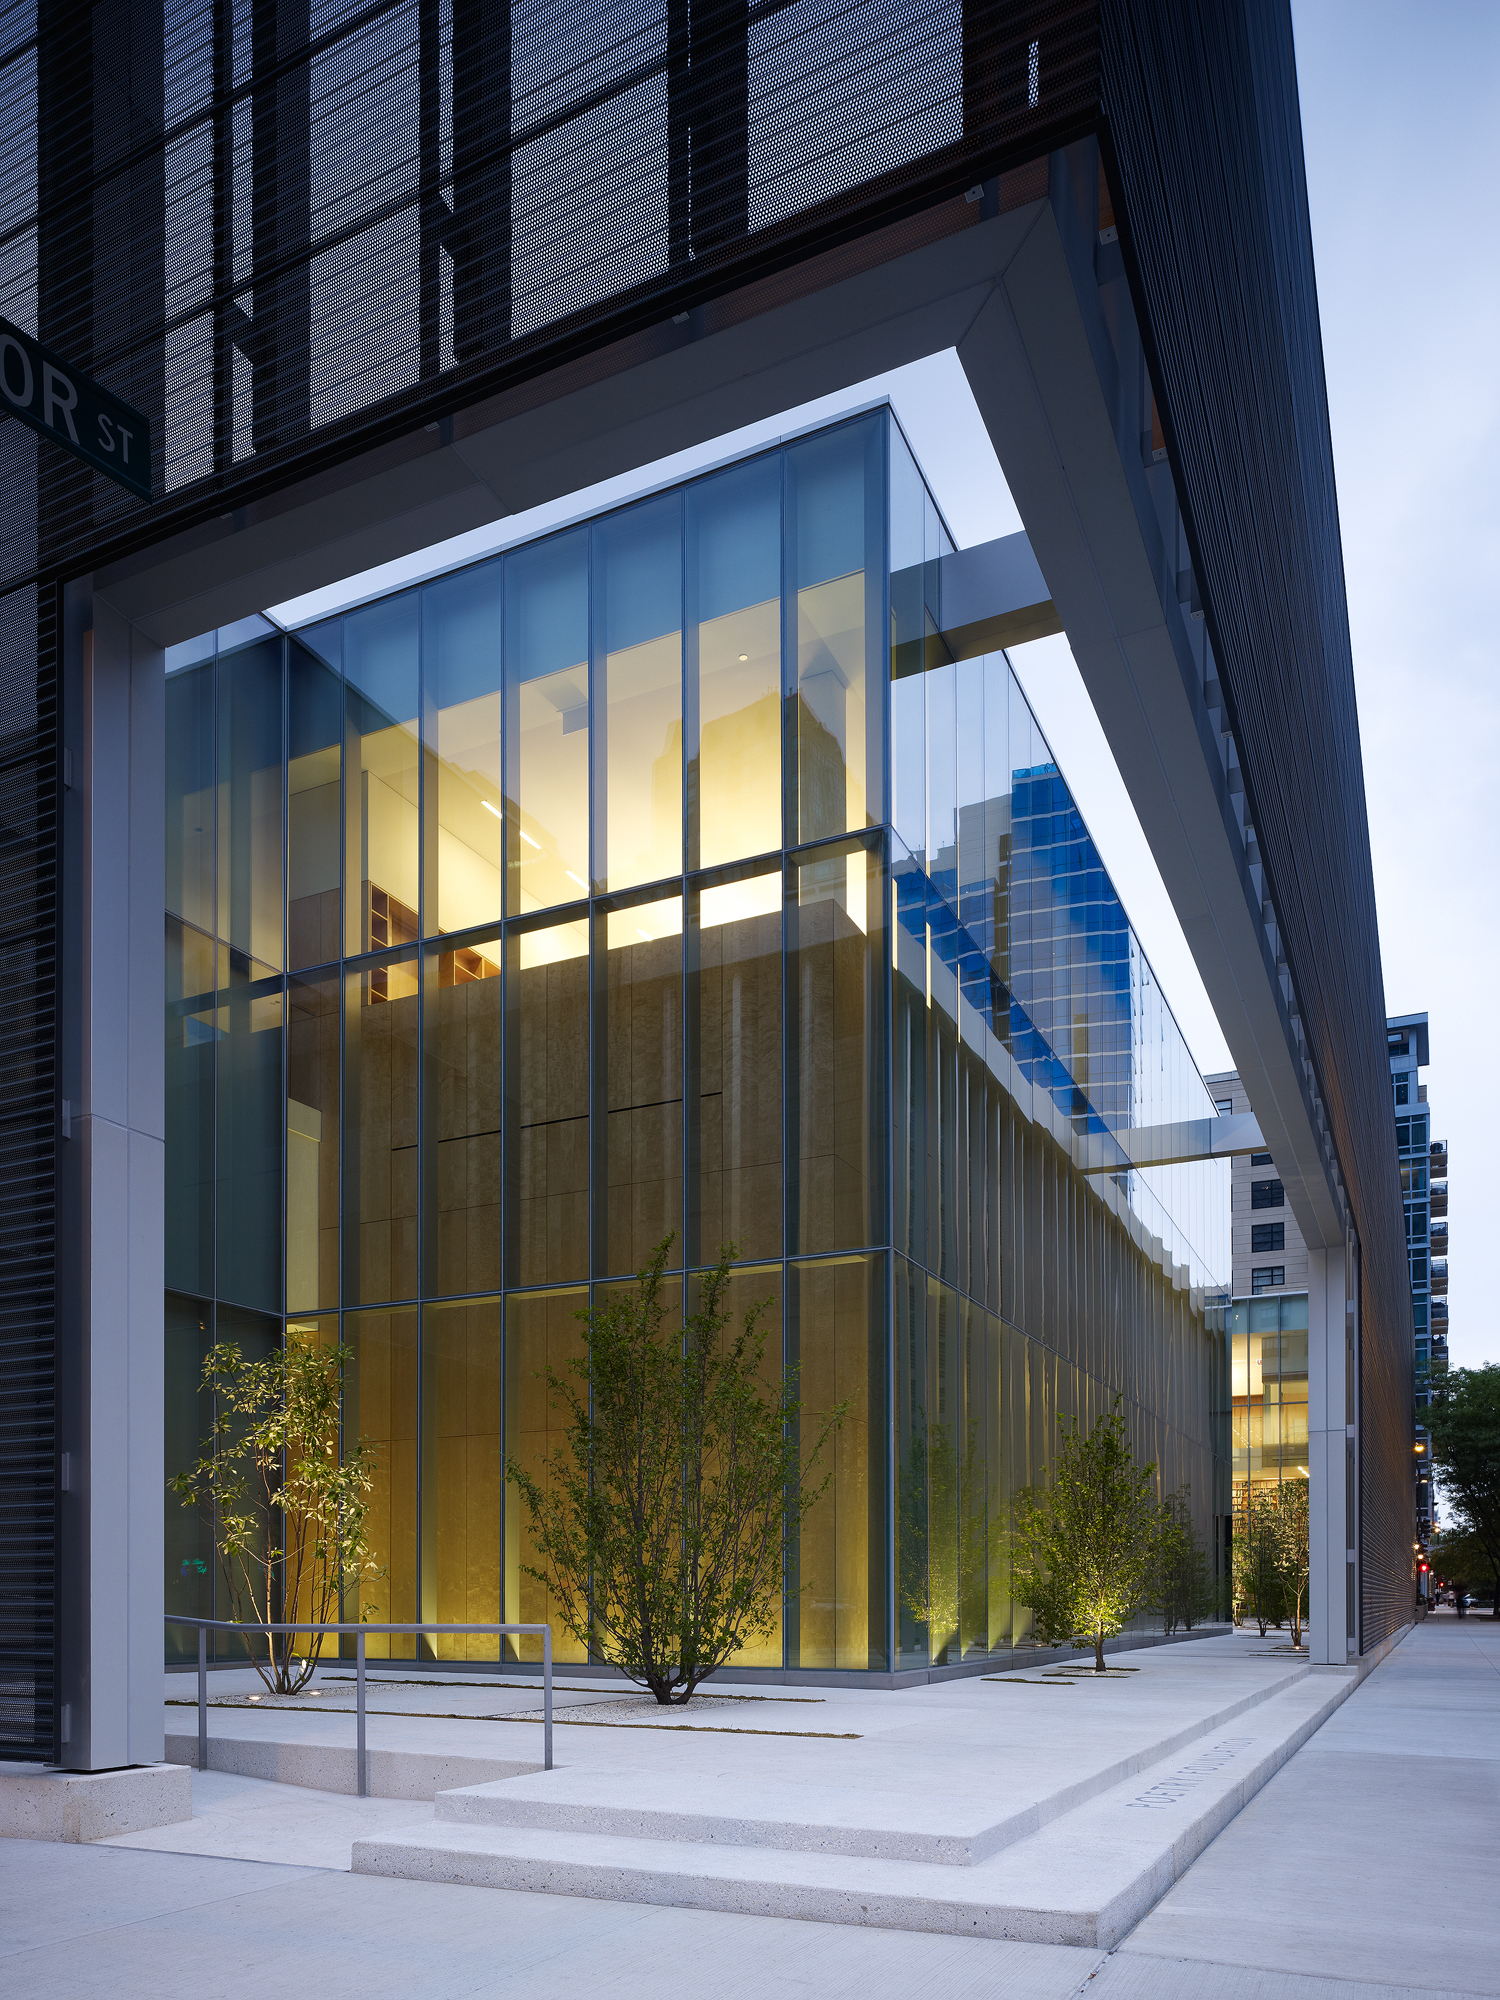  Poetry Foundation  John Ronan Architects  Chicago, IL      Return to Projects  